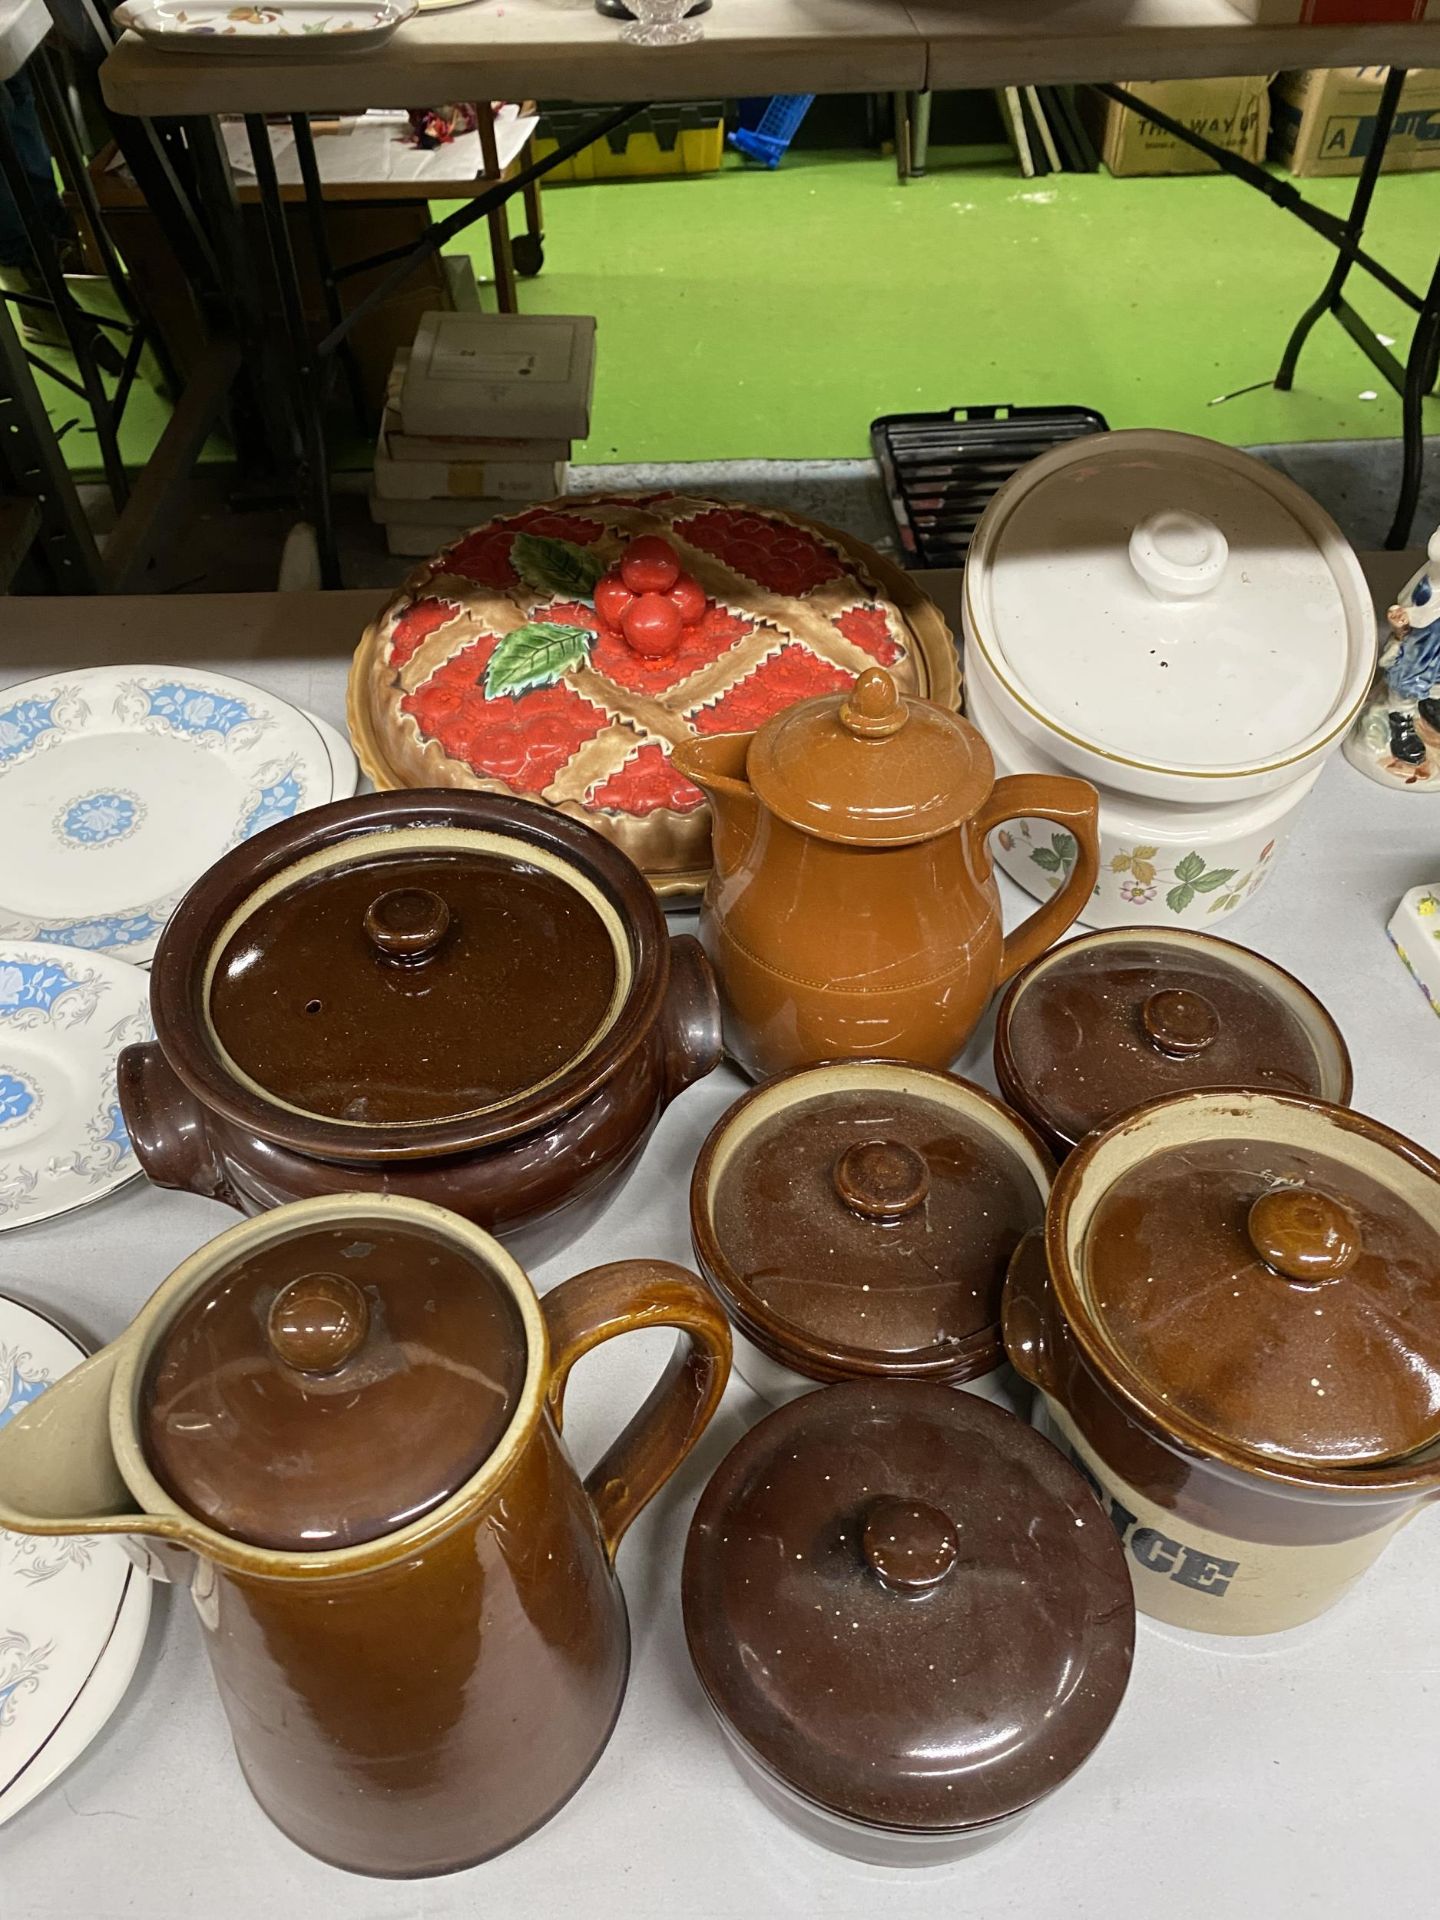 A QUANTITY OF VINTAGE STONEWARE ITEMS TO INCLUDE A TEA AND COFFEE POT, STORAGE CONTAINERS, A PIE